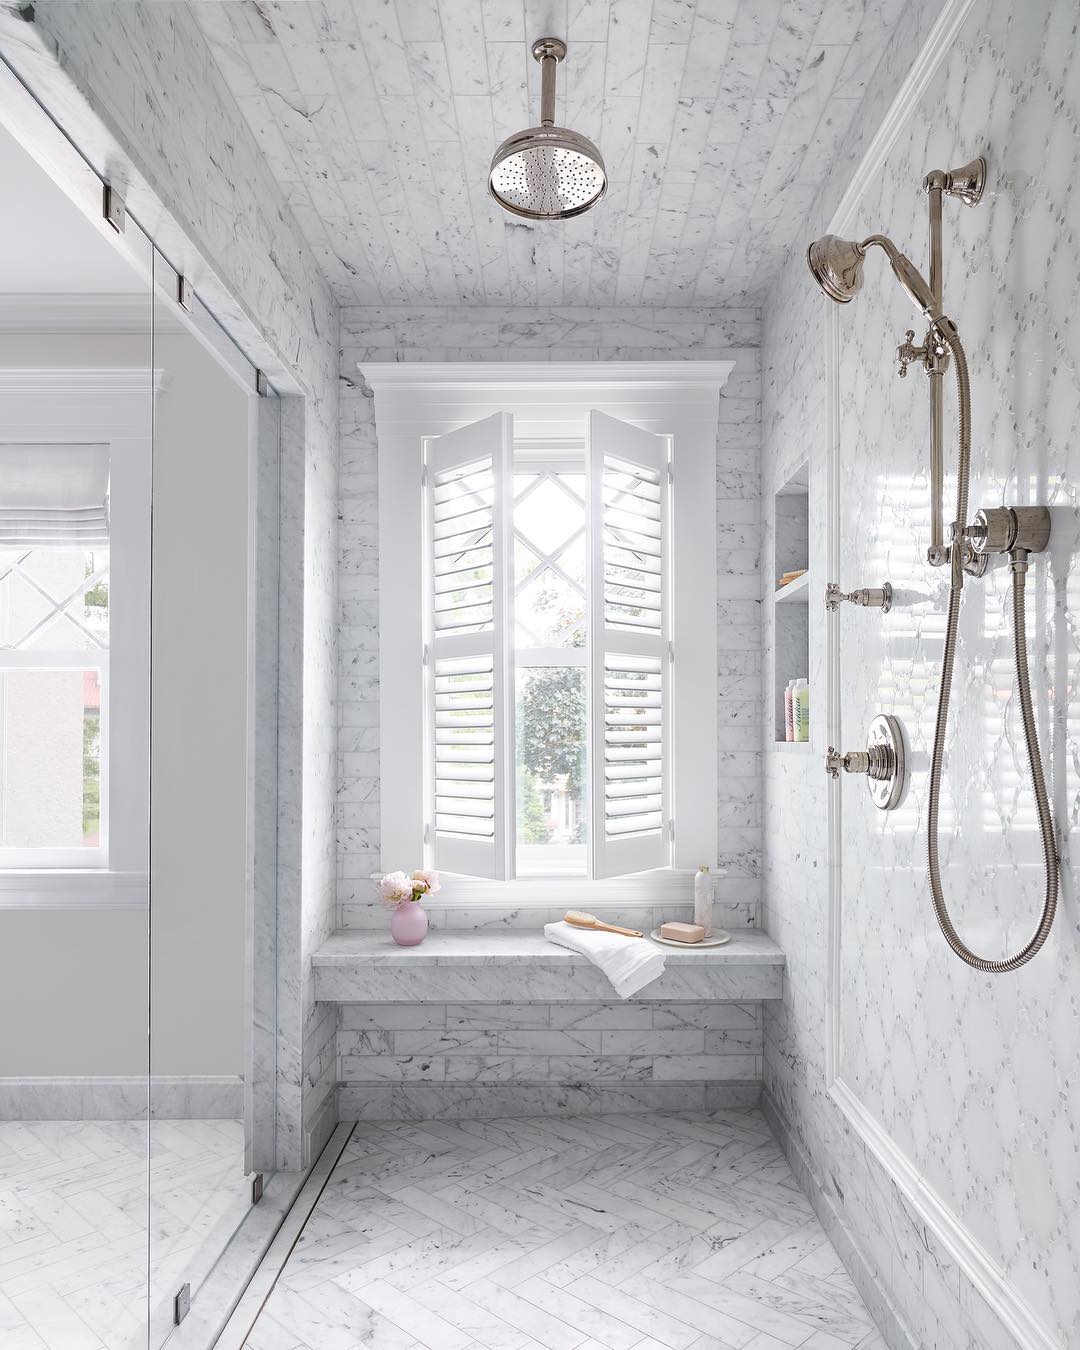 gray tile in large shower with shower bench and window photo by Instagram user @oakhillarchitects